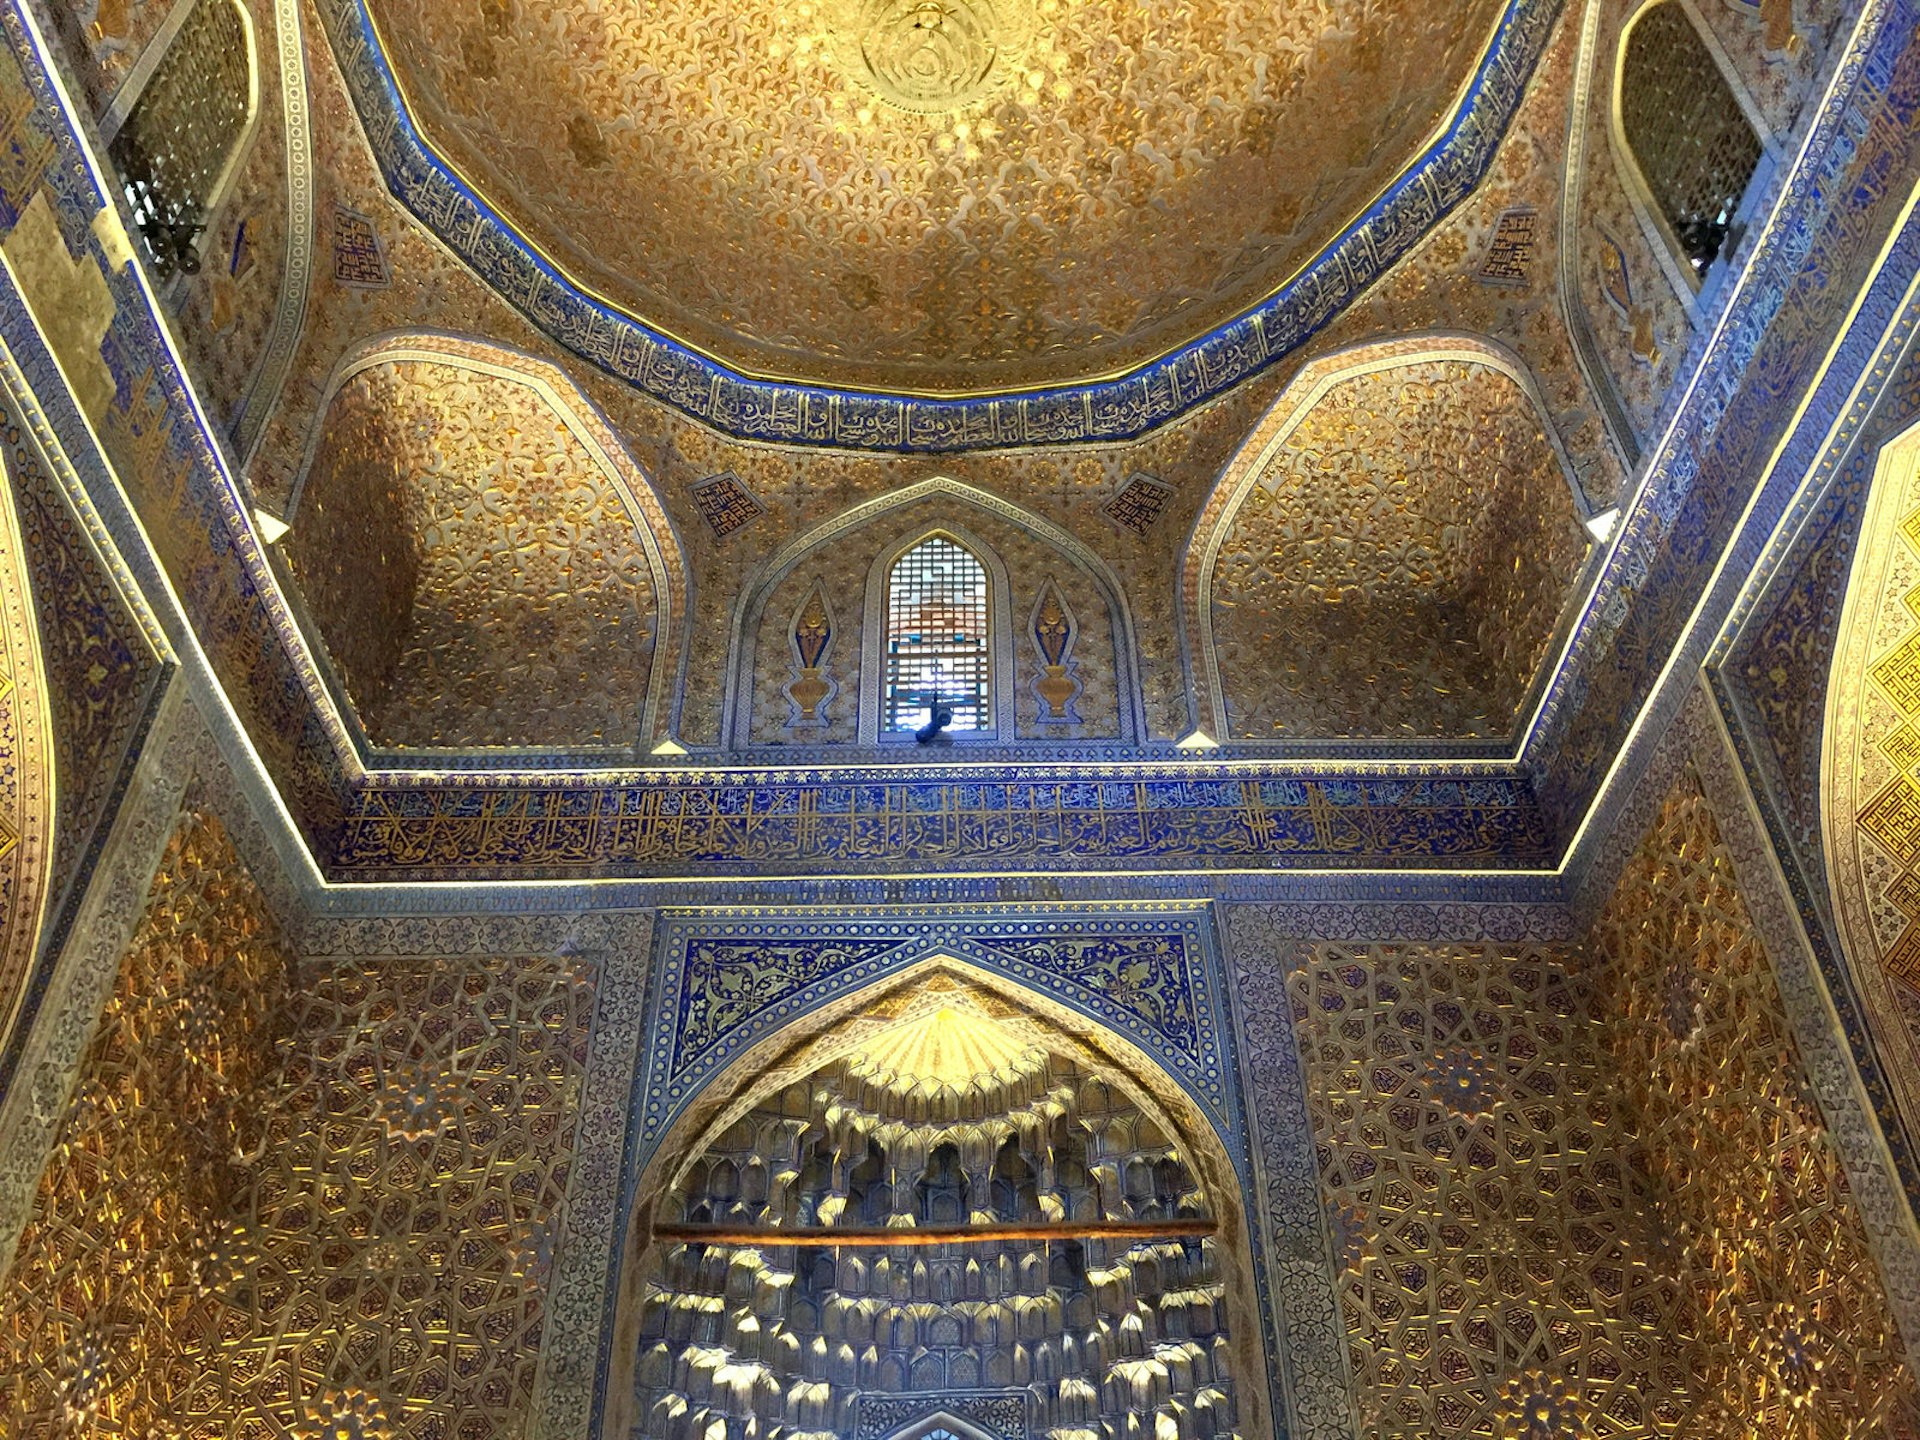 Golden and blue tiles decorate the inside of the vast dome of the Gur-e-Amir